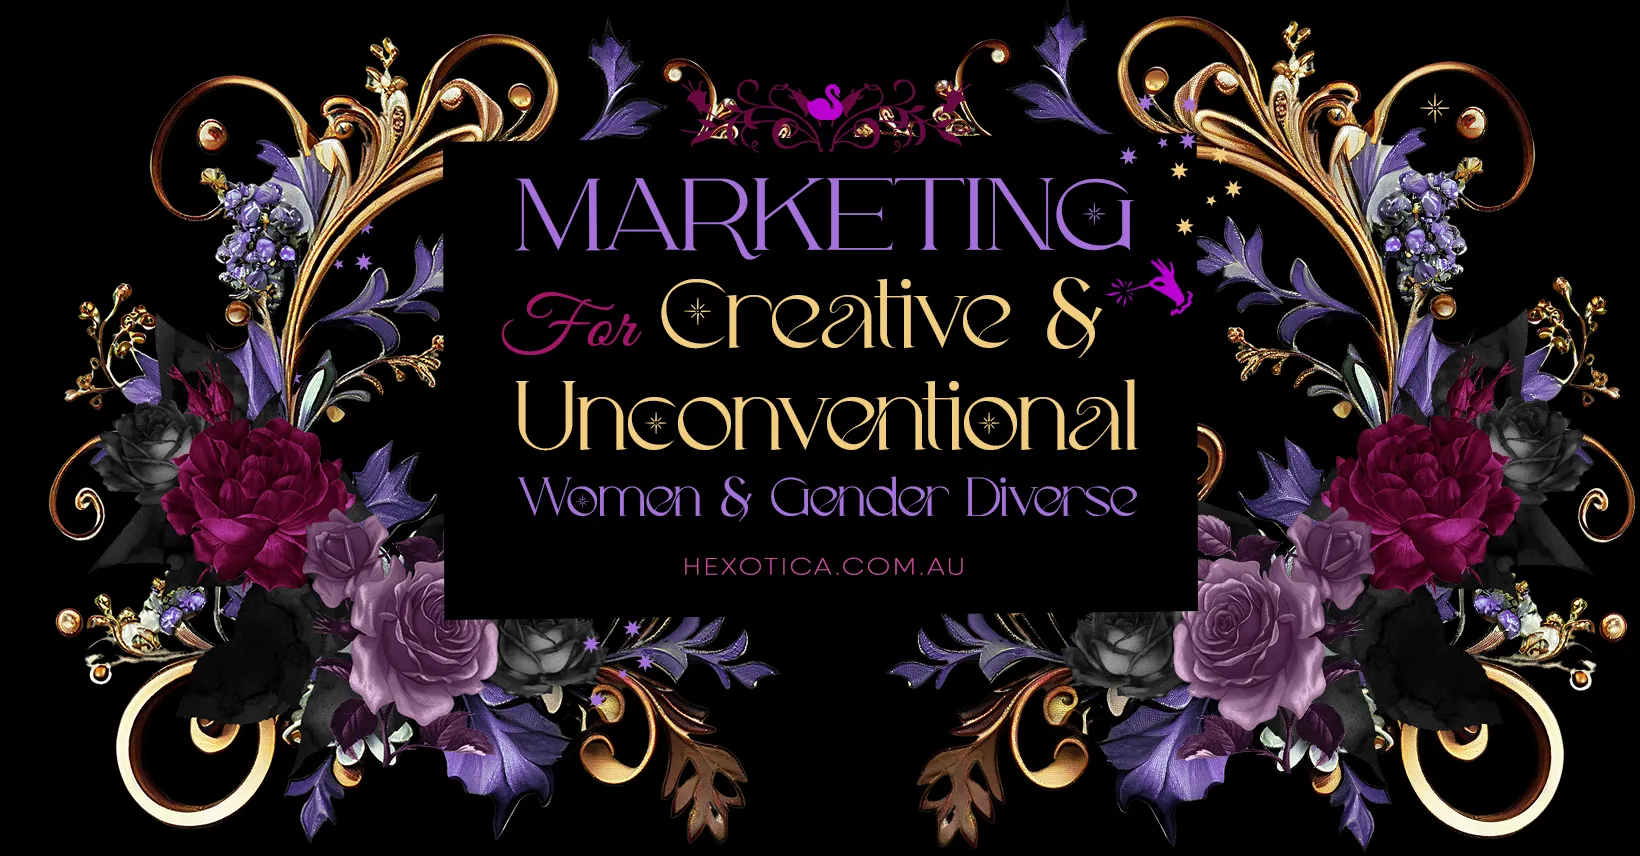 Marketing For Creative & Unconventional Women & Gender Diverse Facebook Group by Hexotica